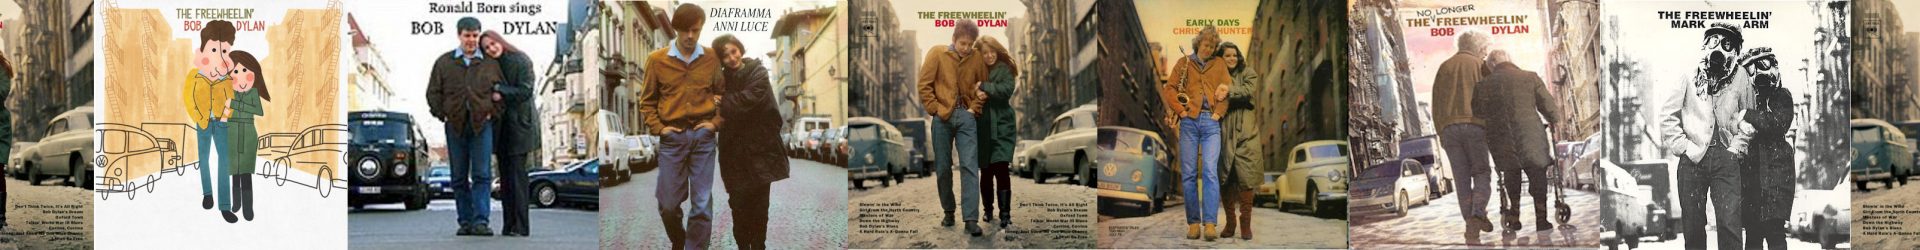 JOHN COUGAR MELLENCAMP: R.O.C.K. in the U.S.A. – THE ROMANTICS: What I Like About You